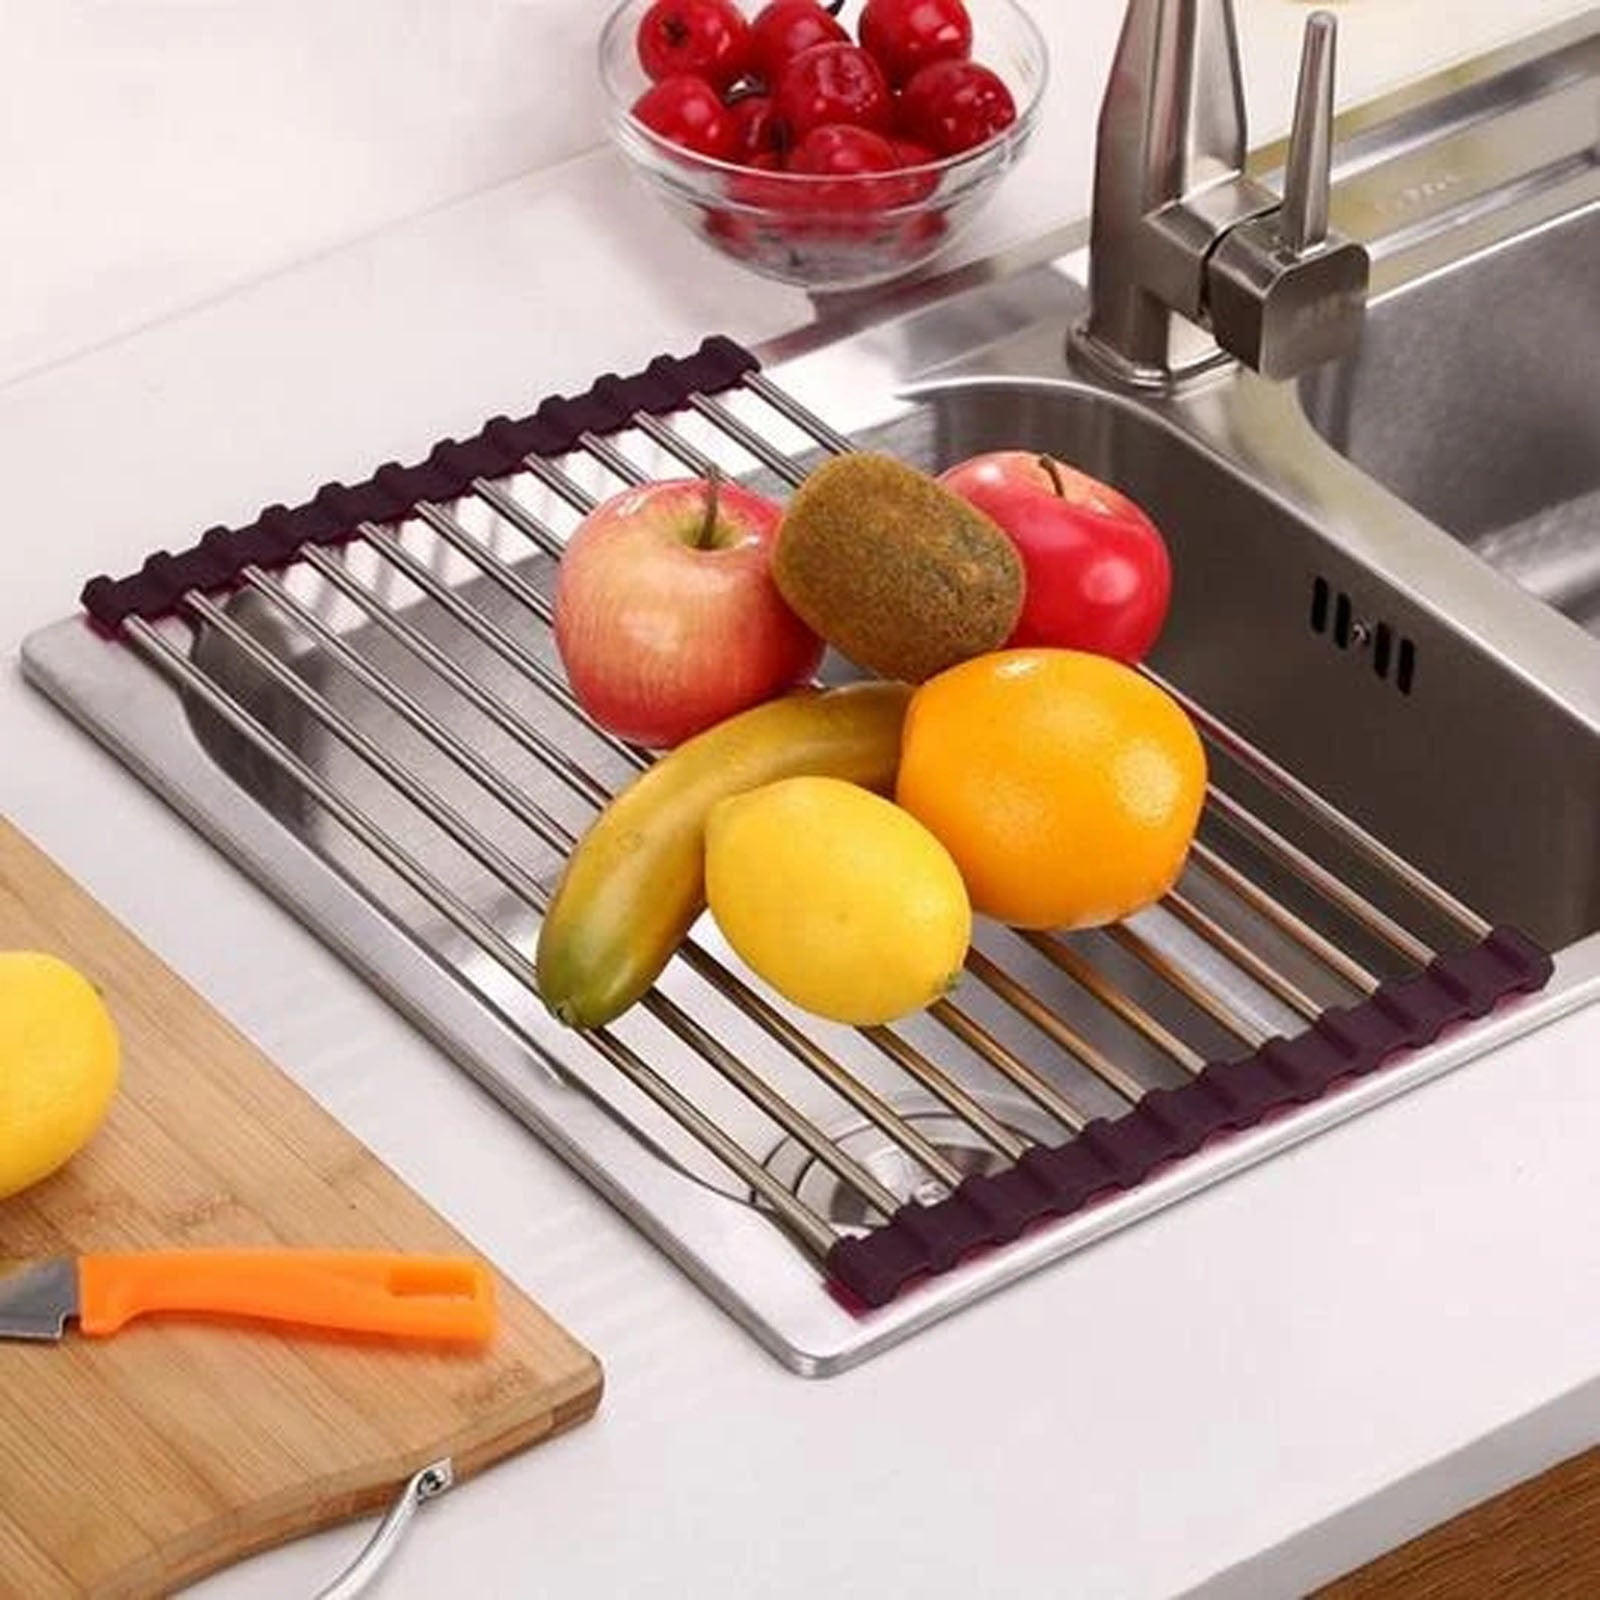 Foldable Dish Rack Drainer Over Sink Organizer